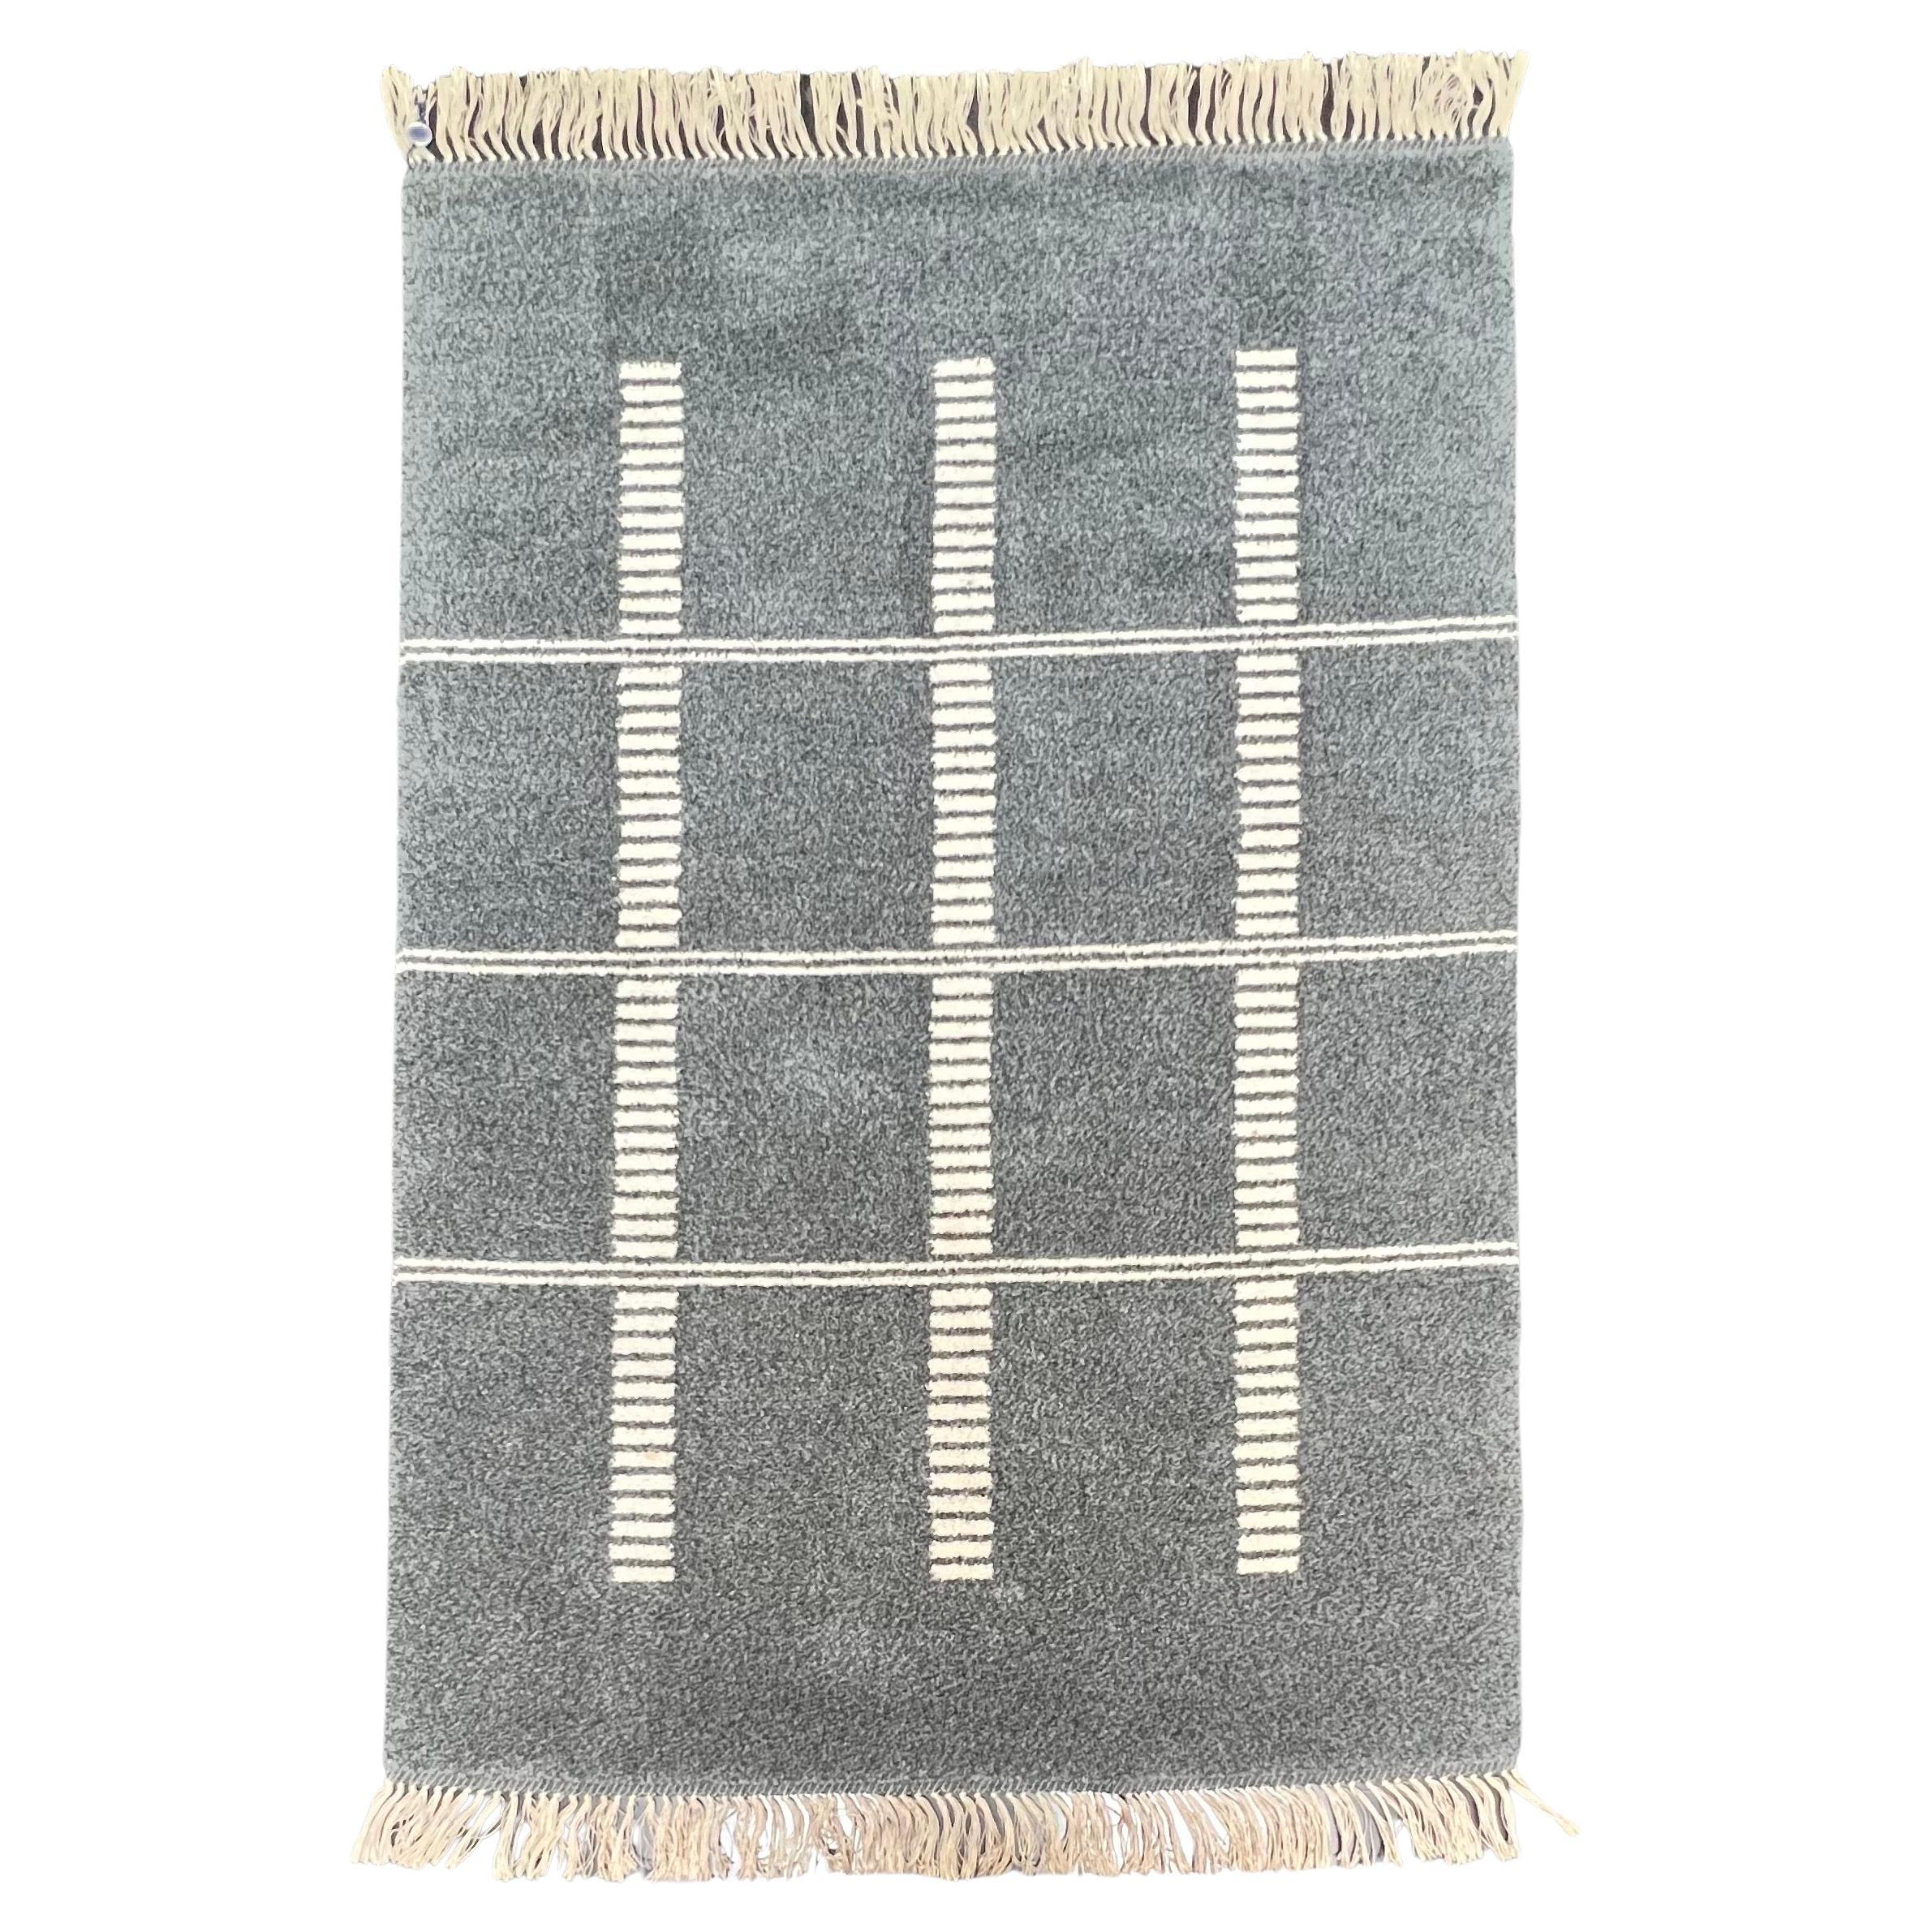 Swedish elegant grey and creme with geometric patterns. Made of wool. It is very soft and in excellent condition for its age. Designed and produced in the 1950s. All fringe are in good condition. It would be a good addition in any rooms of the house.